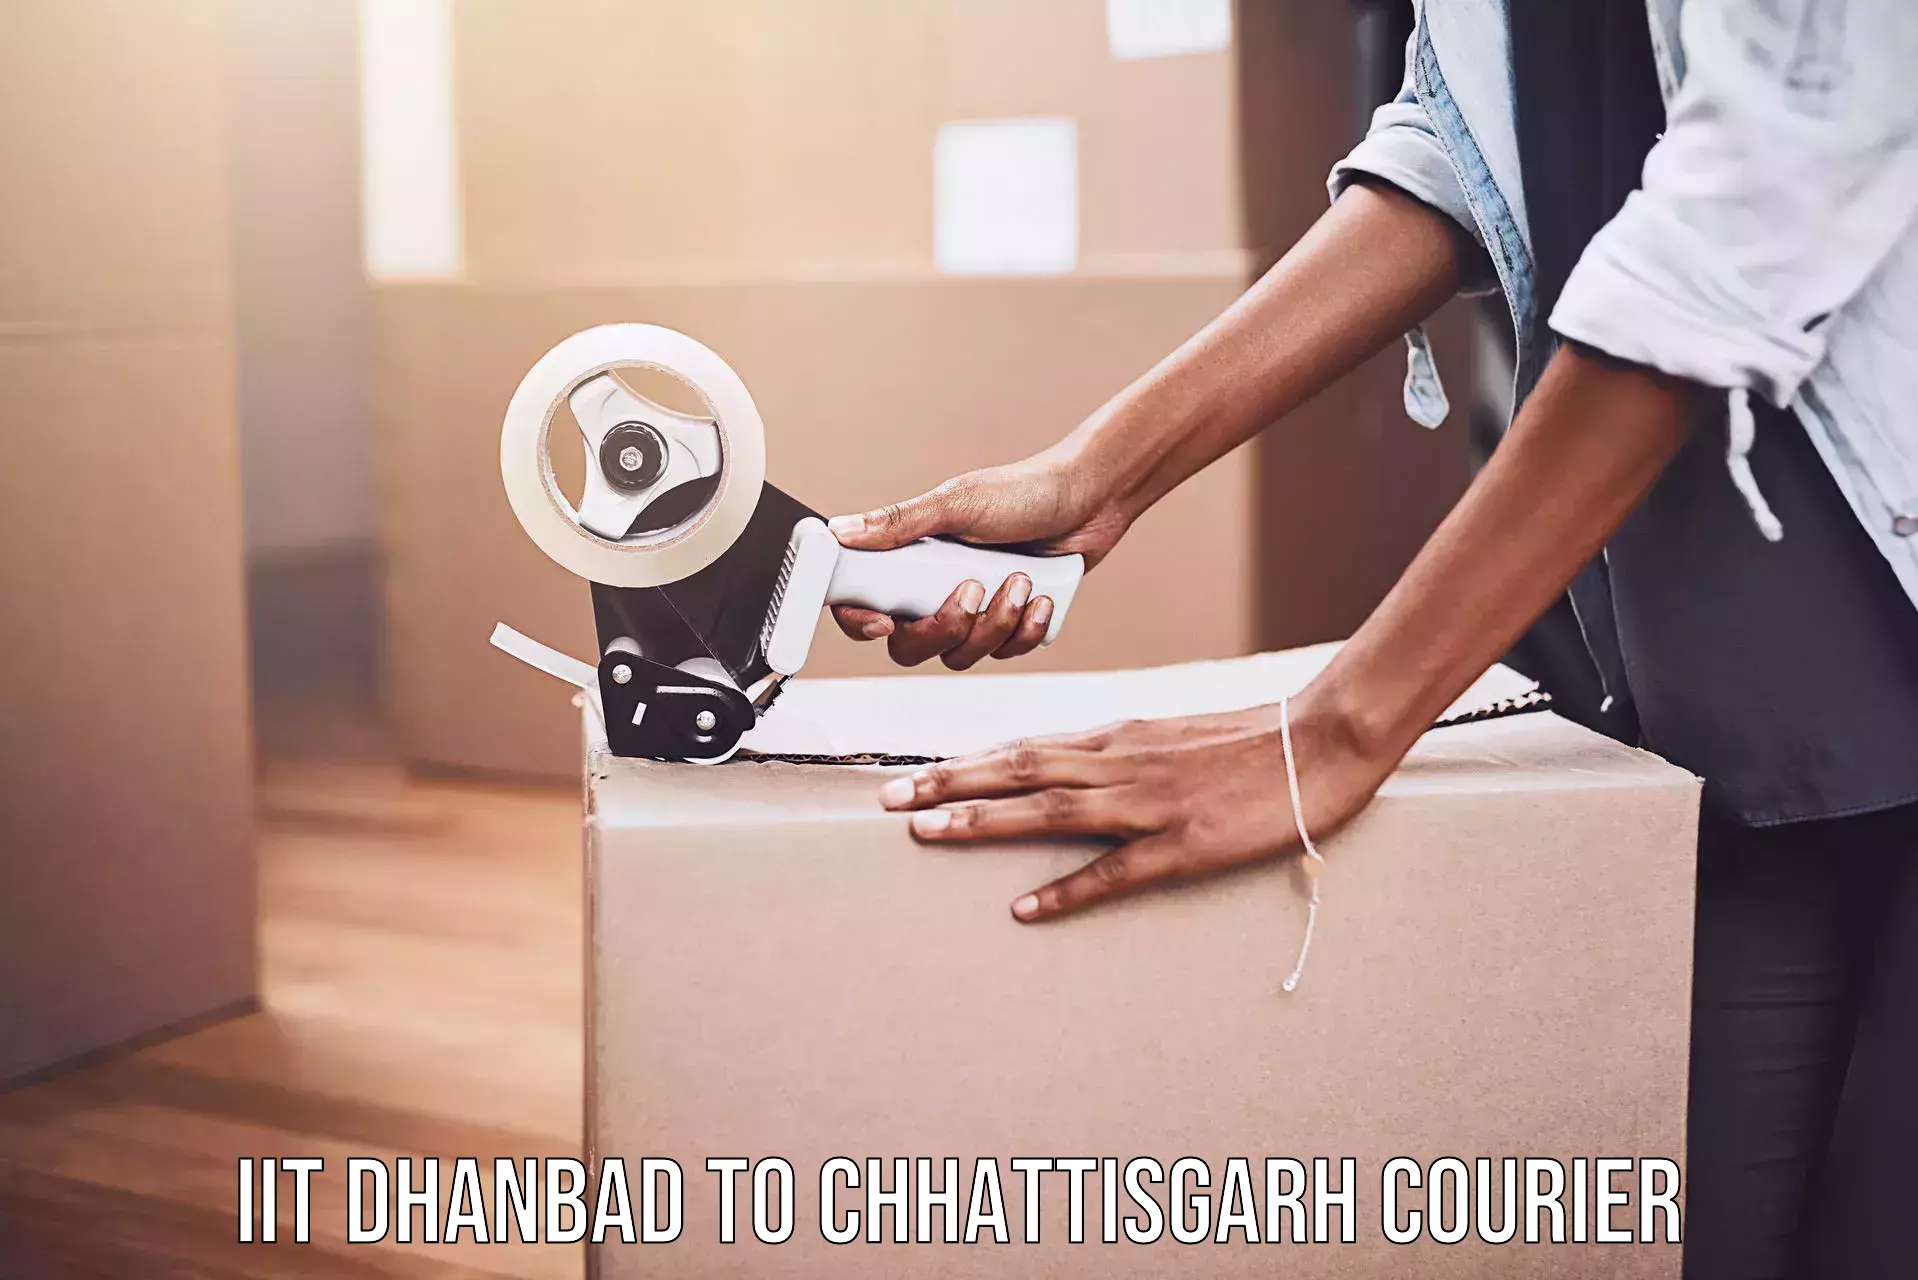 Courier service efficiency IIT Dhanbad to Raigarh